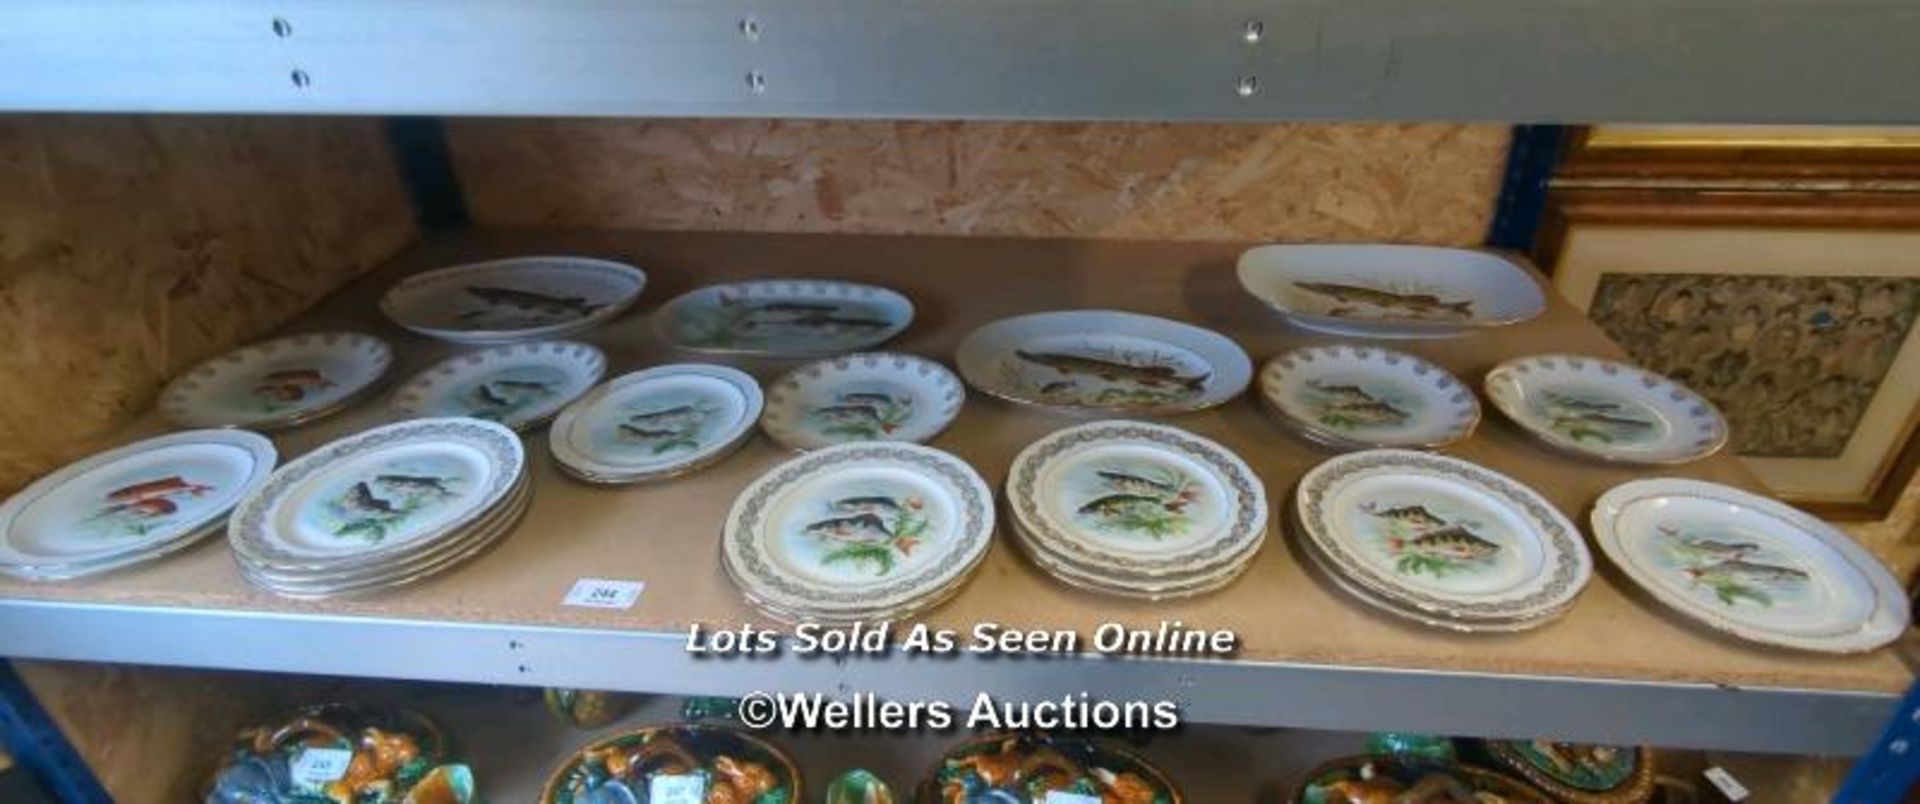 *29 PIECE DINNER SET DECORATED WITH VARIOUS FISH MADE BY VERITABLE PORCELAIN OF FRANCE / ALL LOTS